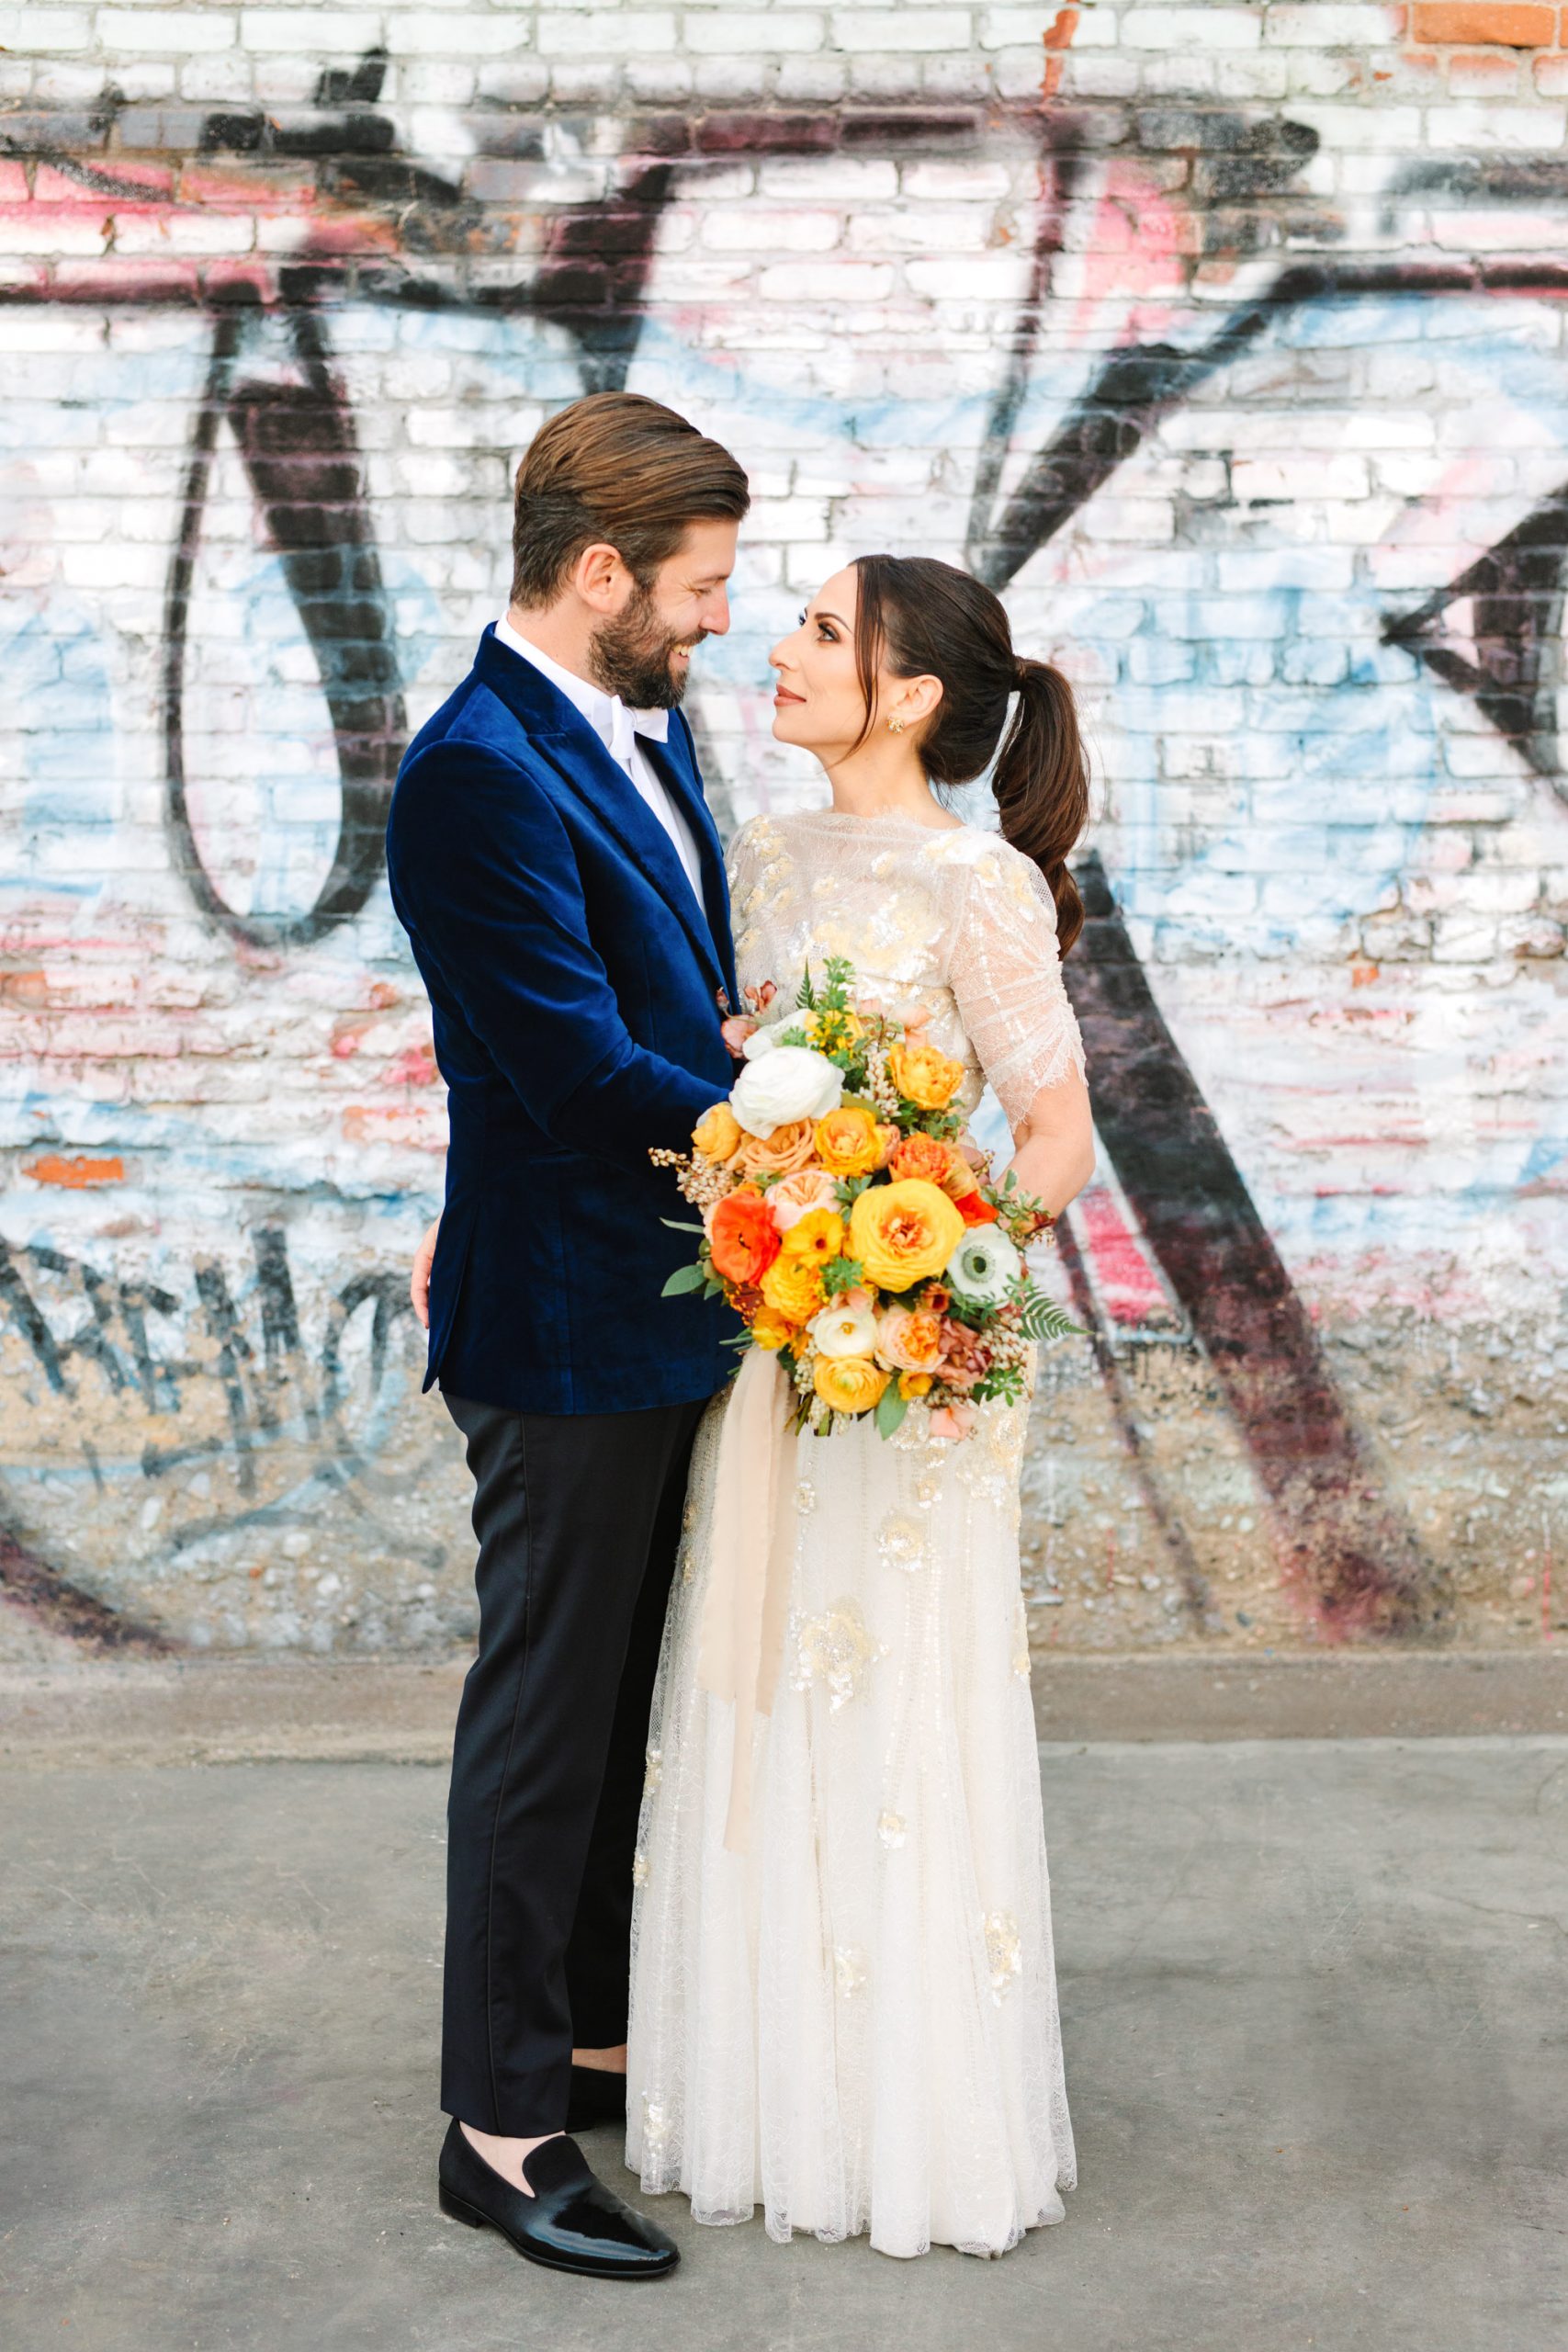 Bride and groom with graffiti backdrop in Los Angeles Arts District www.marycostaweddings.com